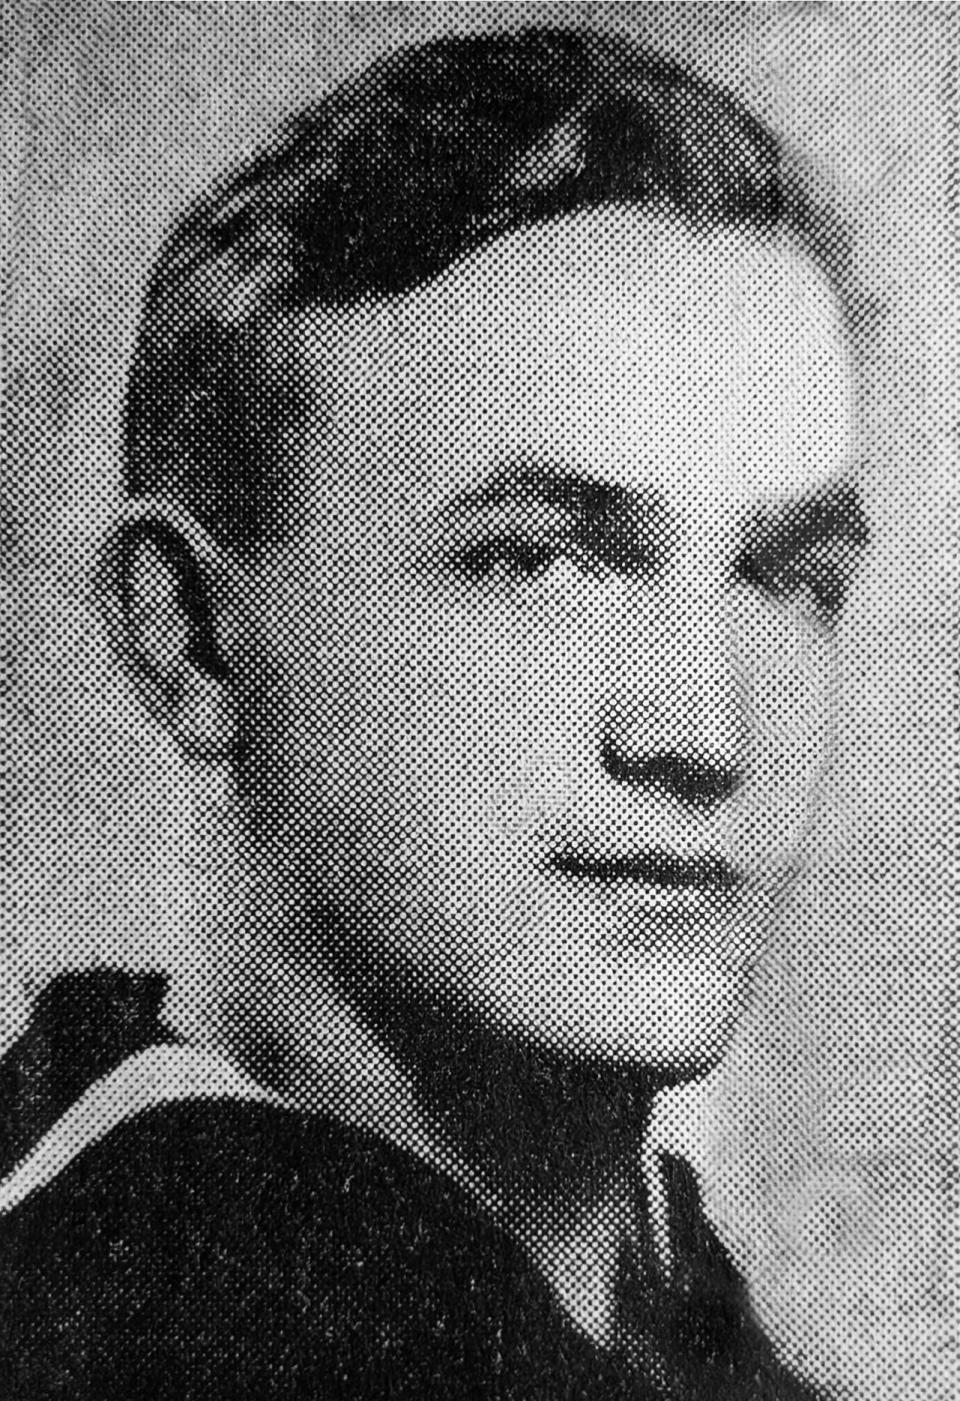 Frank Hryniewicz, a 20-year-old soldier killed on the USS Oklahoma in Japan's attack on Pearl Harbor, was to be reinterred at Arlington National Cemetery on May 16.n(Credit: Hryniewicz Family)